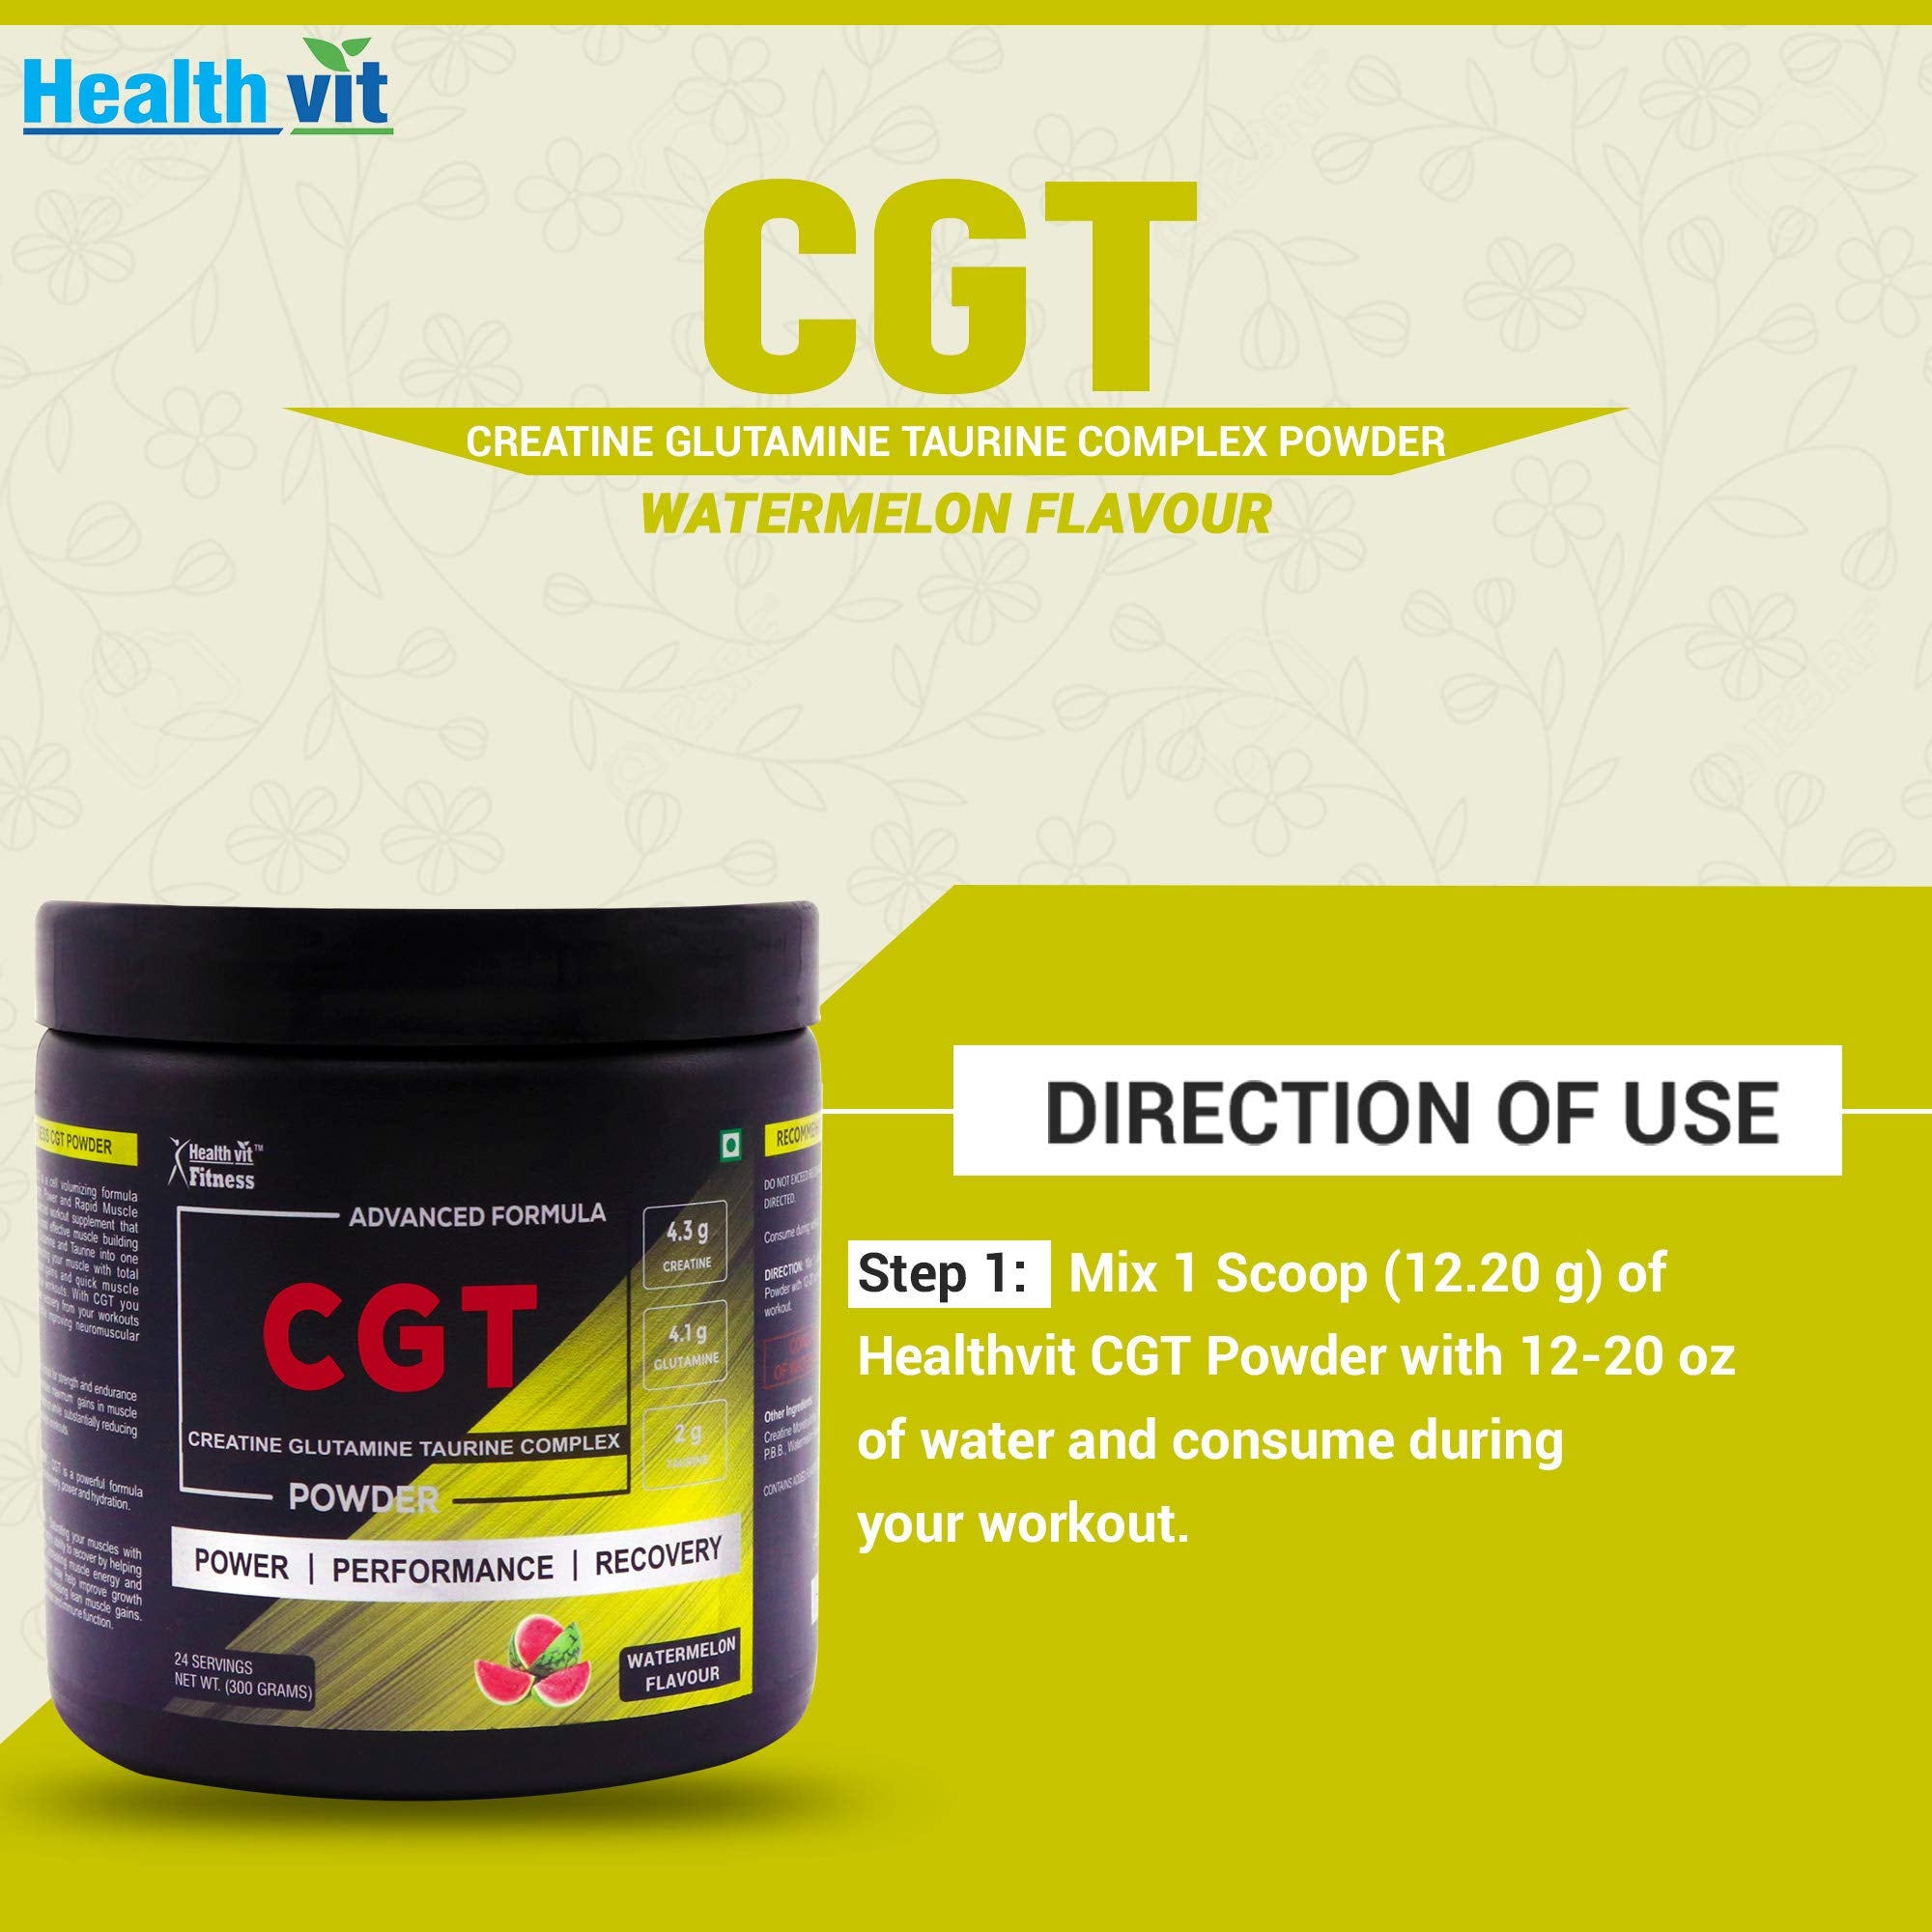 Healthvit Fitness Advanced CGT Powder - Creatine 4.3gm Glutamine 4.1gm Taurine 2gm Complex | Helps In Muscles Recovery | Supports Muscle Gain | Performance & Endurancen | Boost Performance | Vegan And Banned Substance Free | 300gm (Waternelon Flavor)